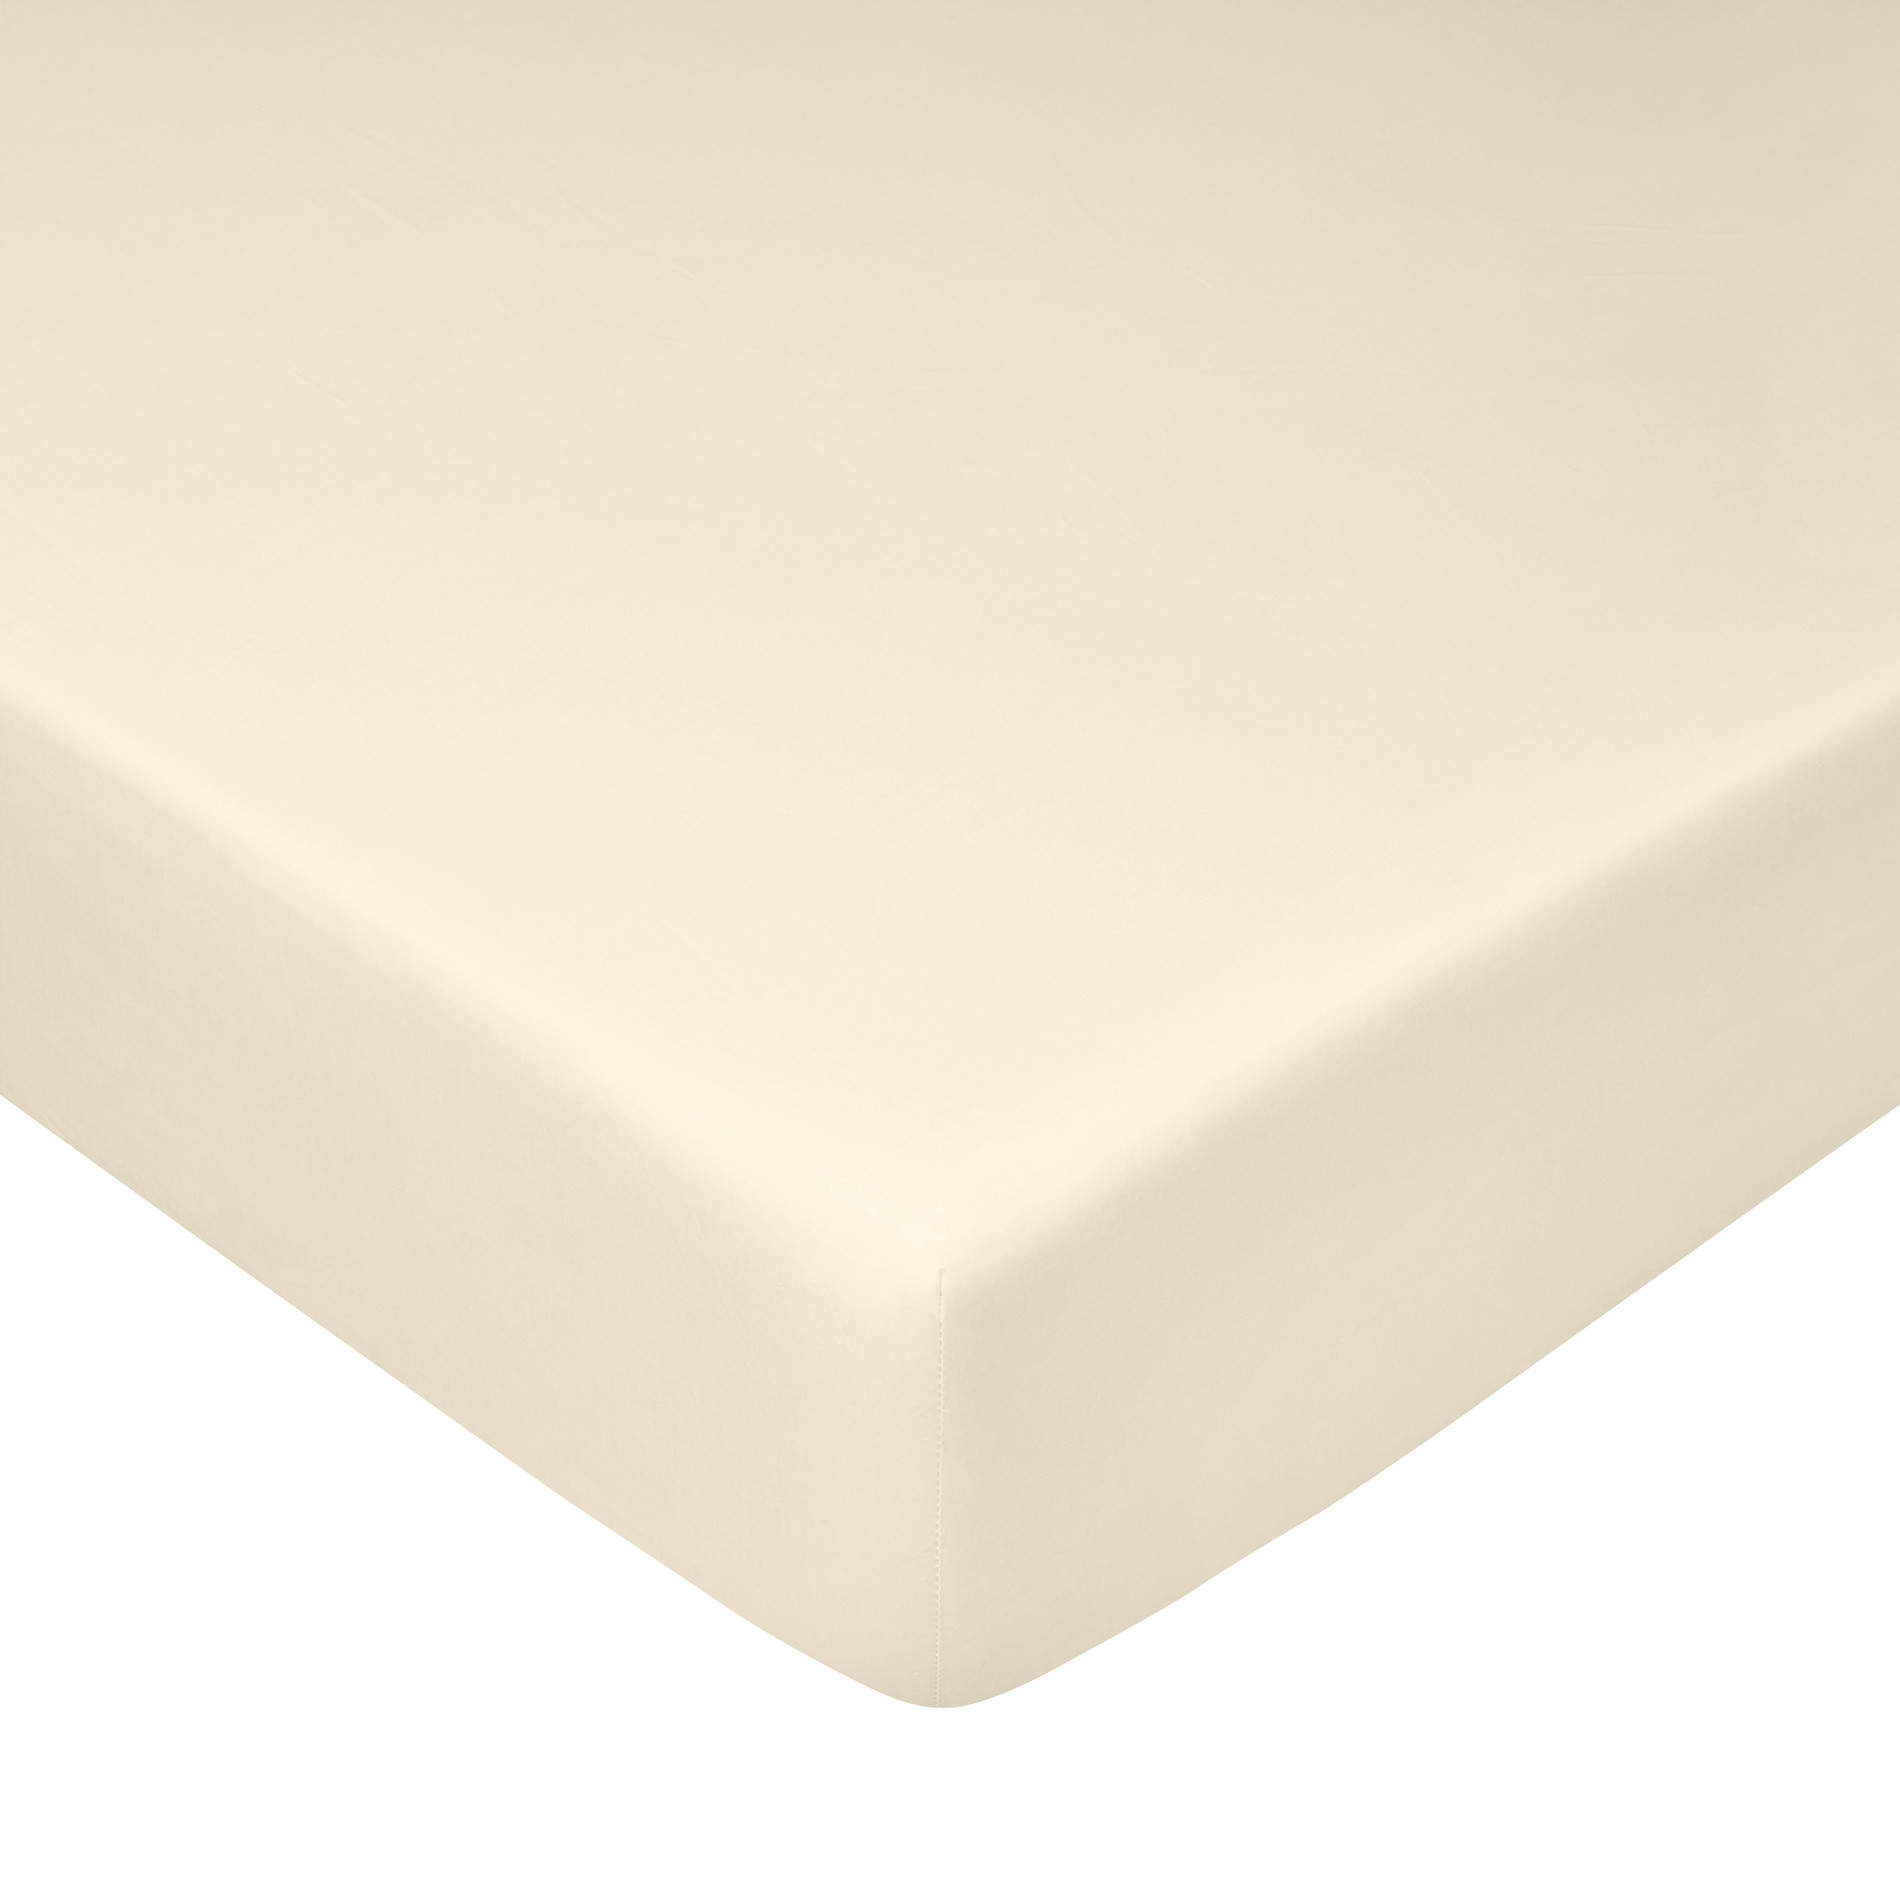 Zefiro solid colour fitted sheet in percale., White Ivory, large image number 0